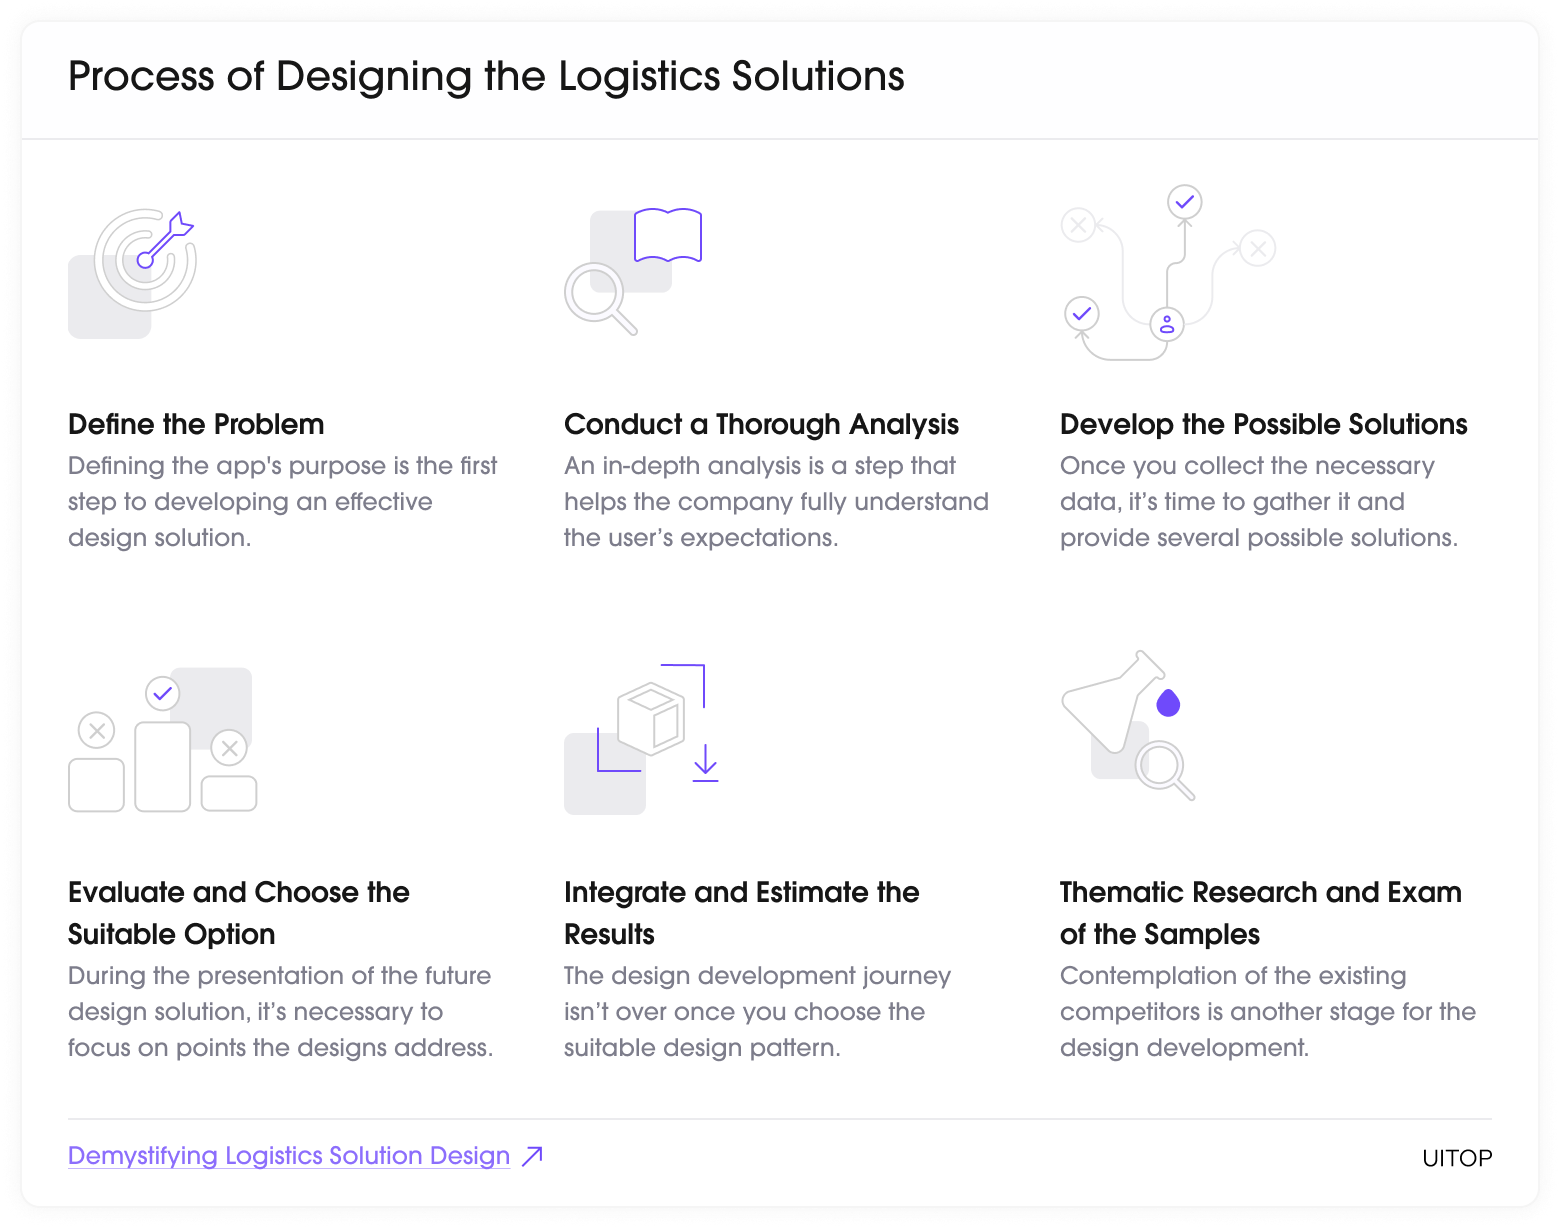 Process of Designing the Logistics Solutions